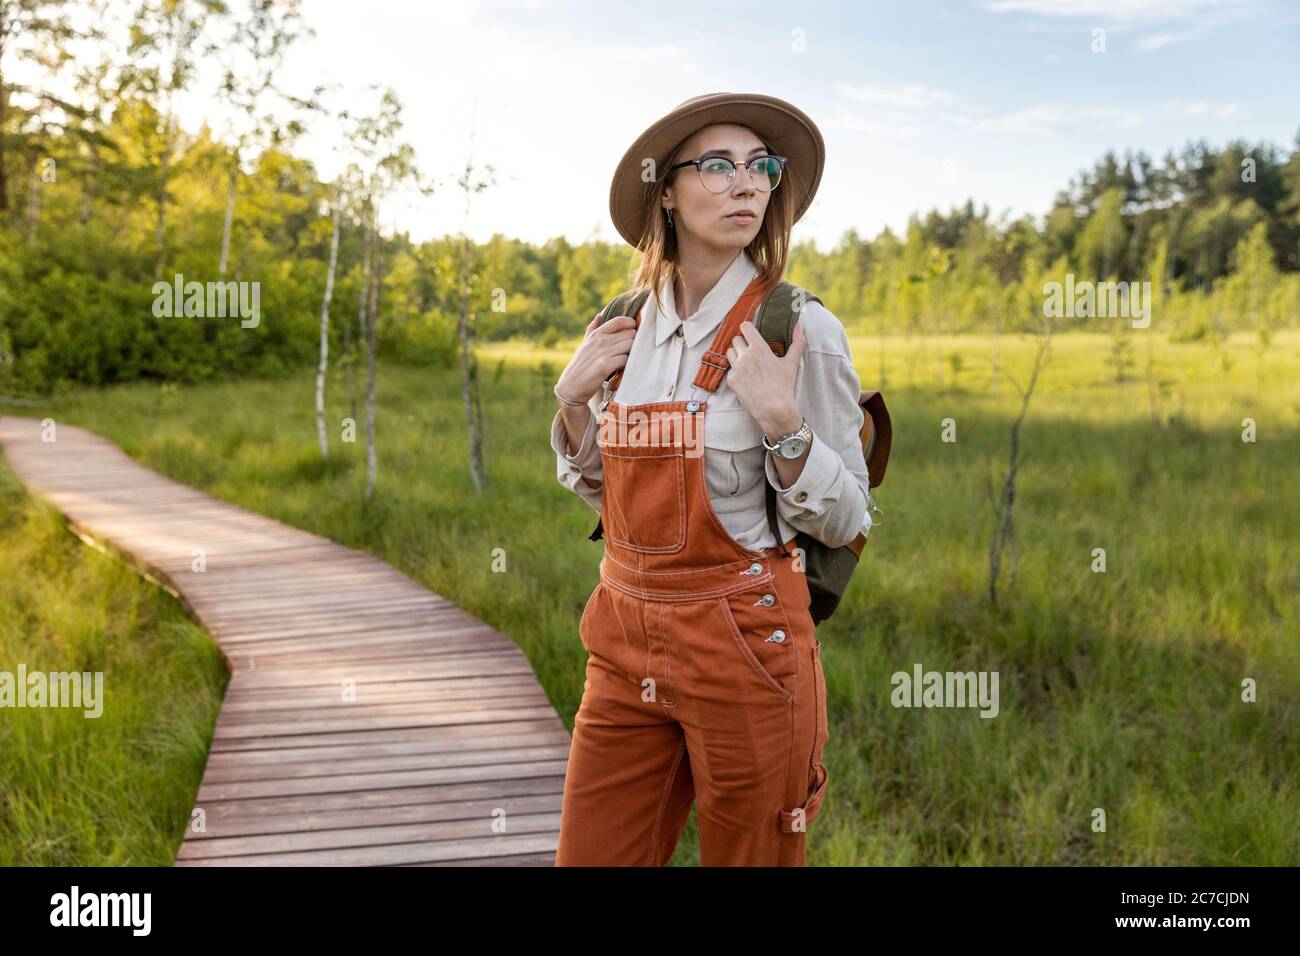 Portrait of woman botanist with backpack on ecological hiking trail in summer. Naturalist exploring wildlife and ecotourism adventure walking on path Stock Photo